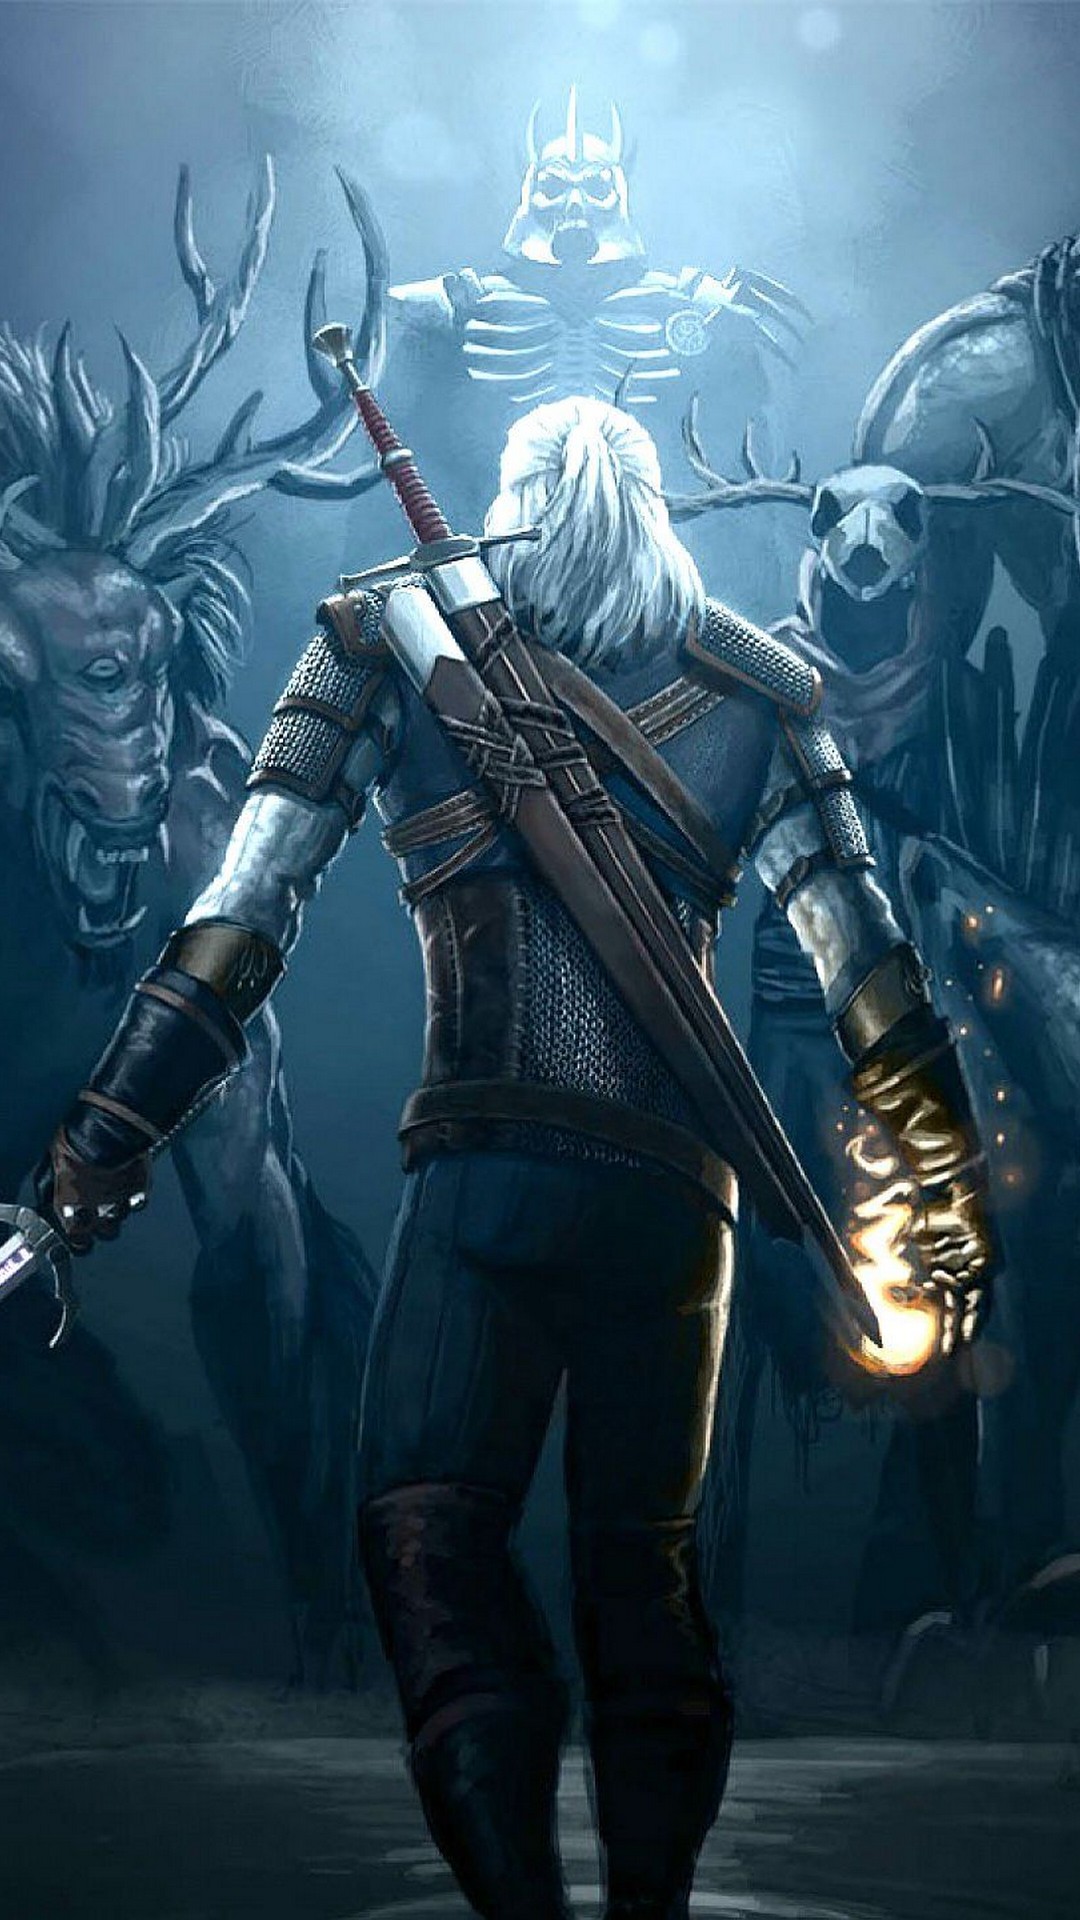 The Witcher iPhone 6 Wallpaper HD with high-resolution 1080x1920 pixel. Download all Mobile Wallpapers and Use them as wallpapers for your iPhone, Tablet, iPad, Android and other mobile devices